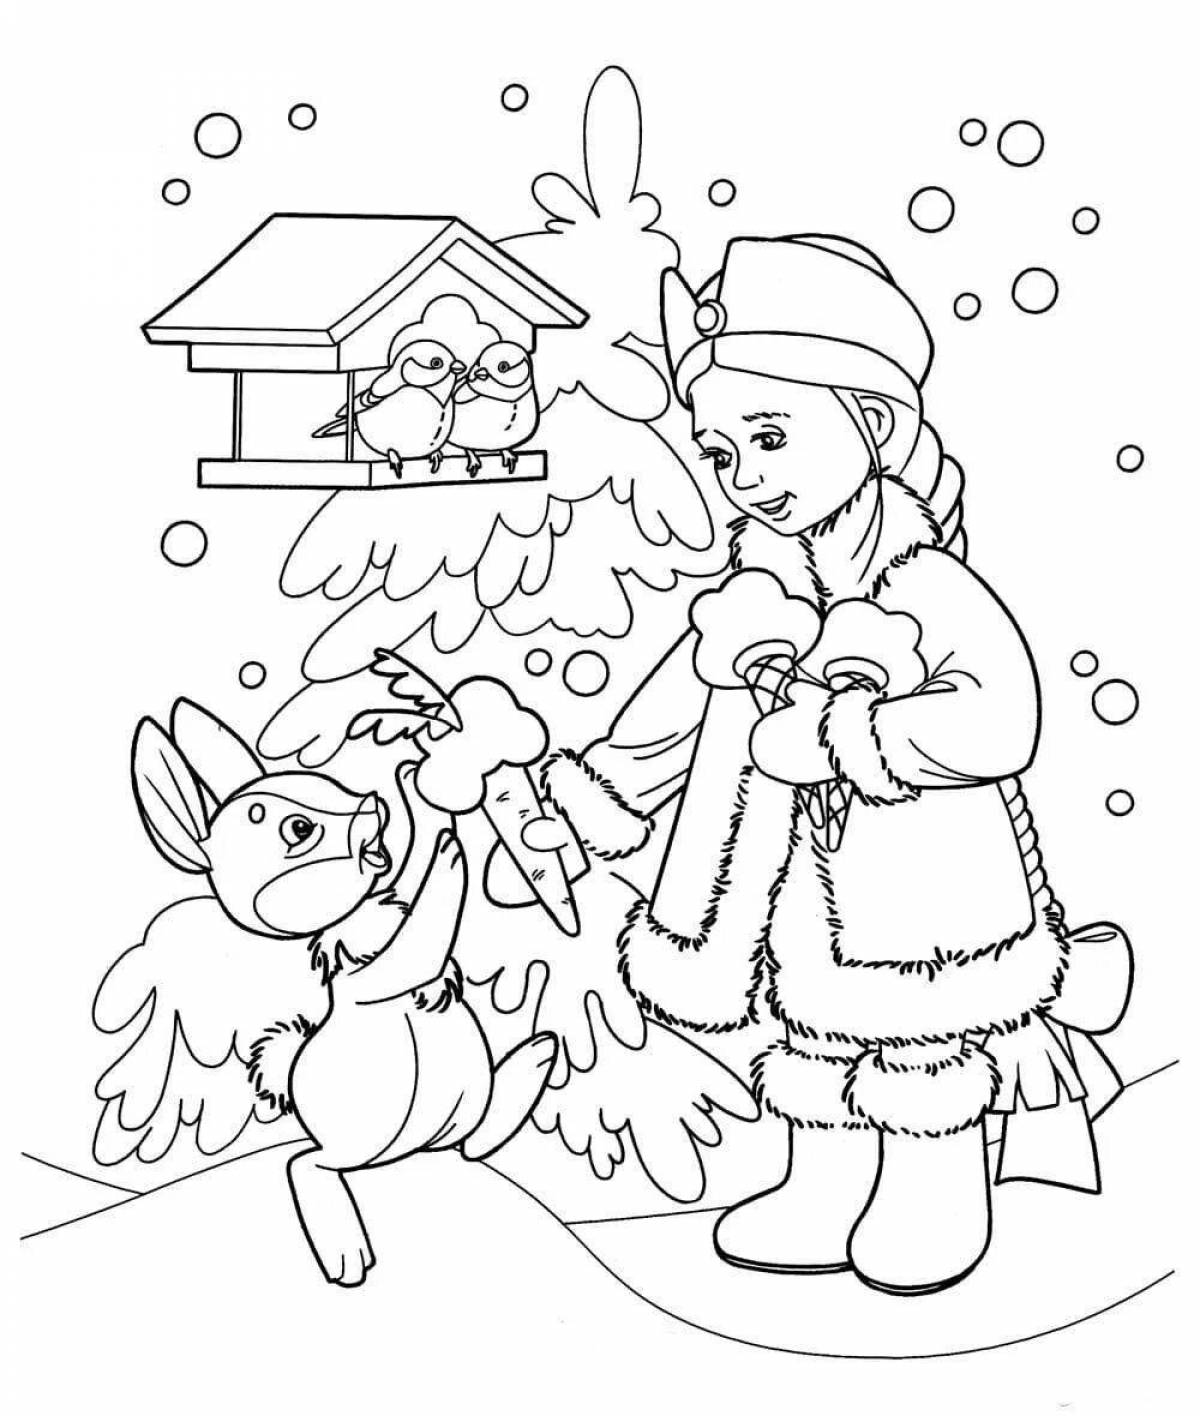 Violent winter Christmas coloring